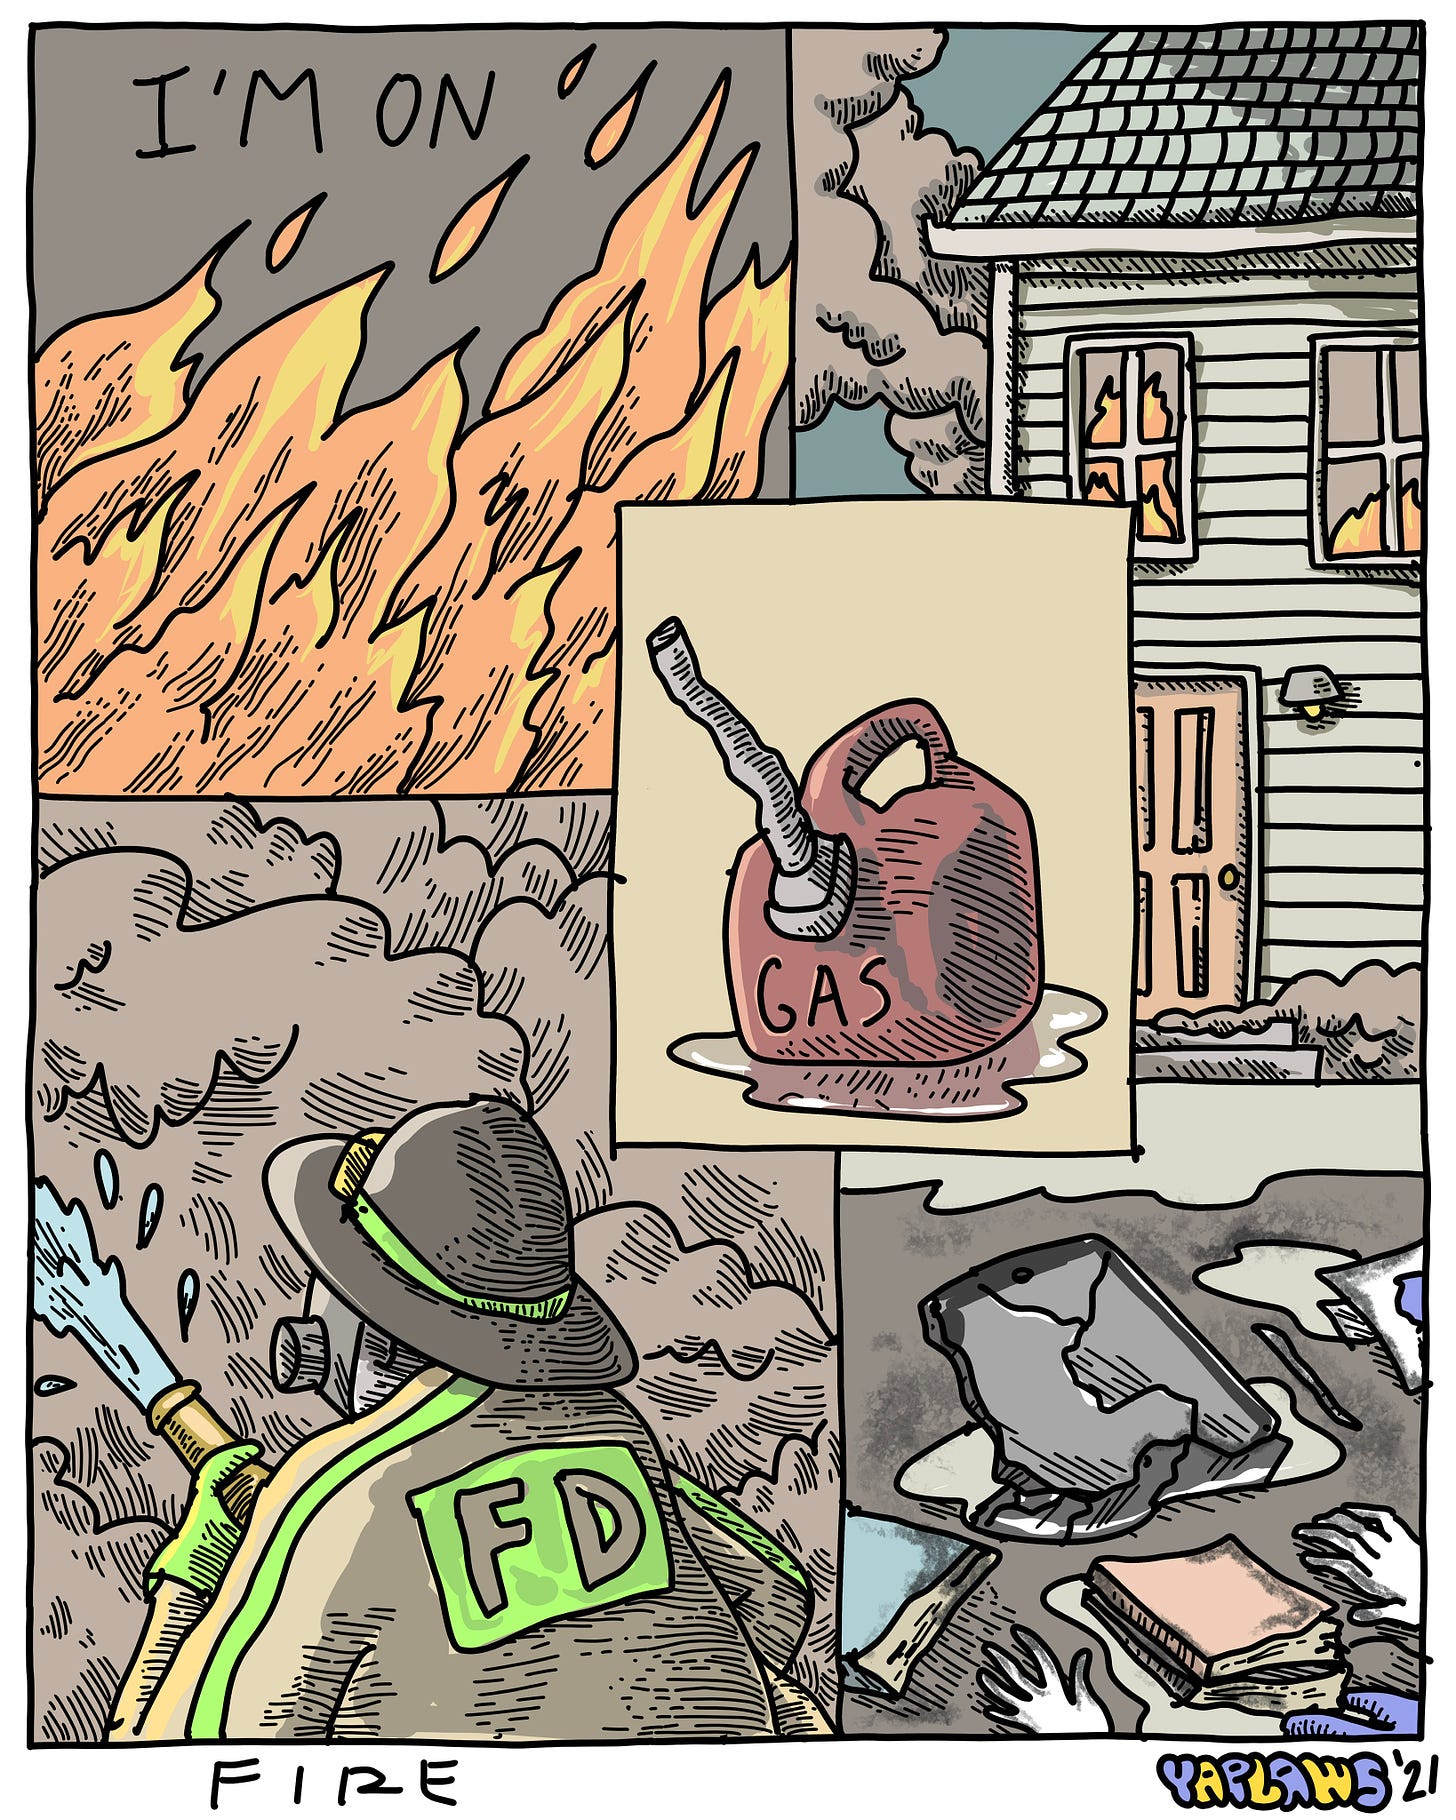 Comic of a house on fire